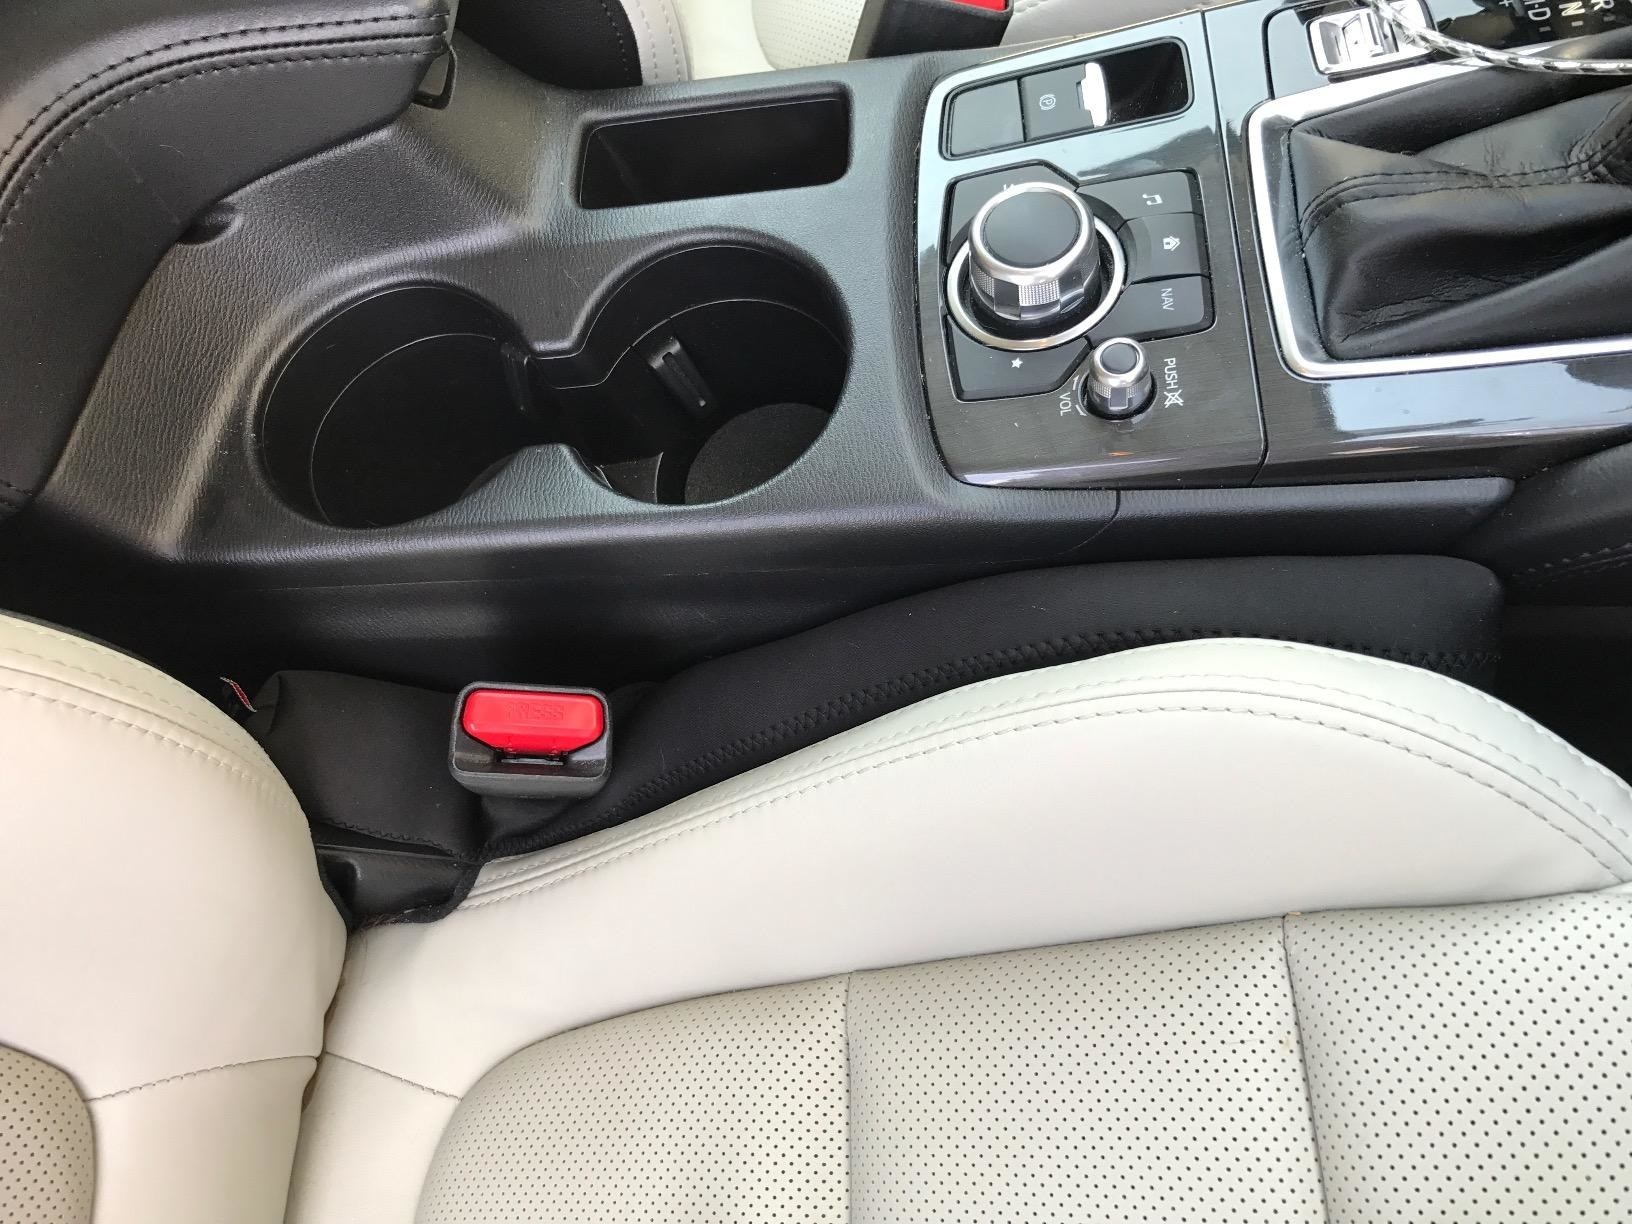 The gap filler between the seat and console